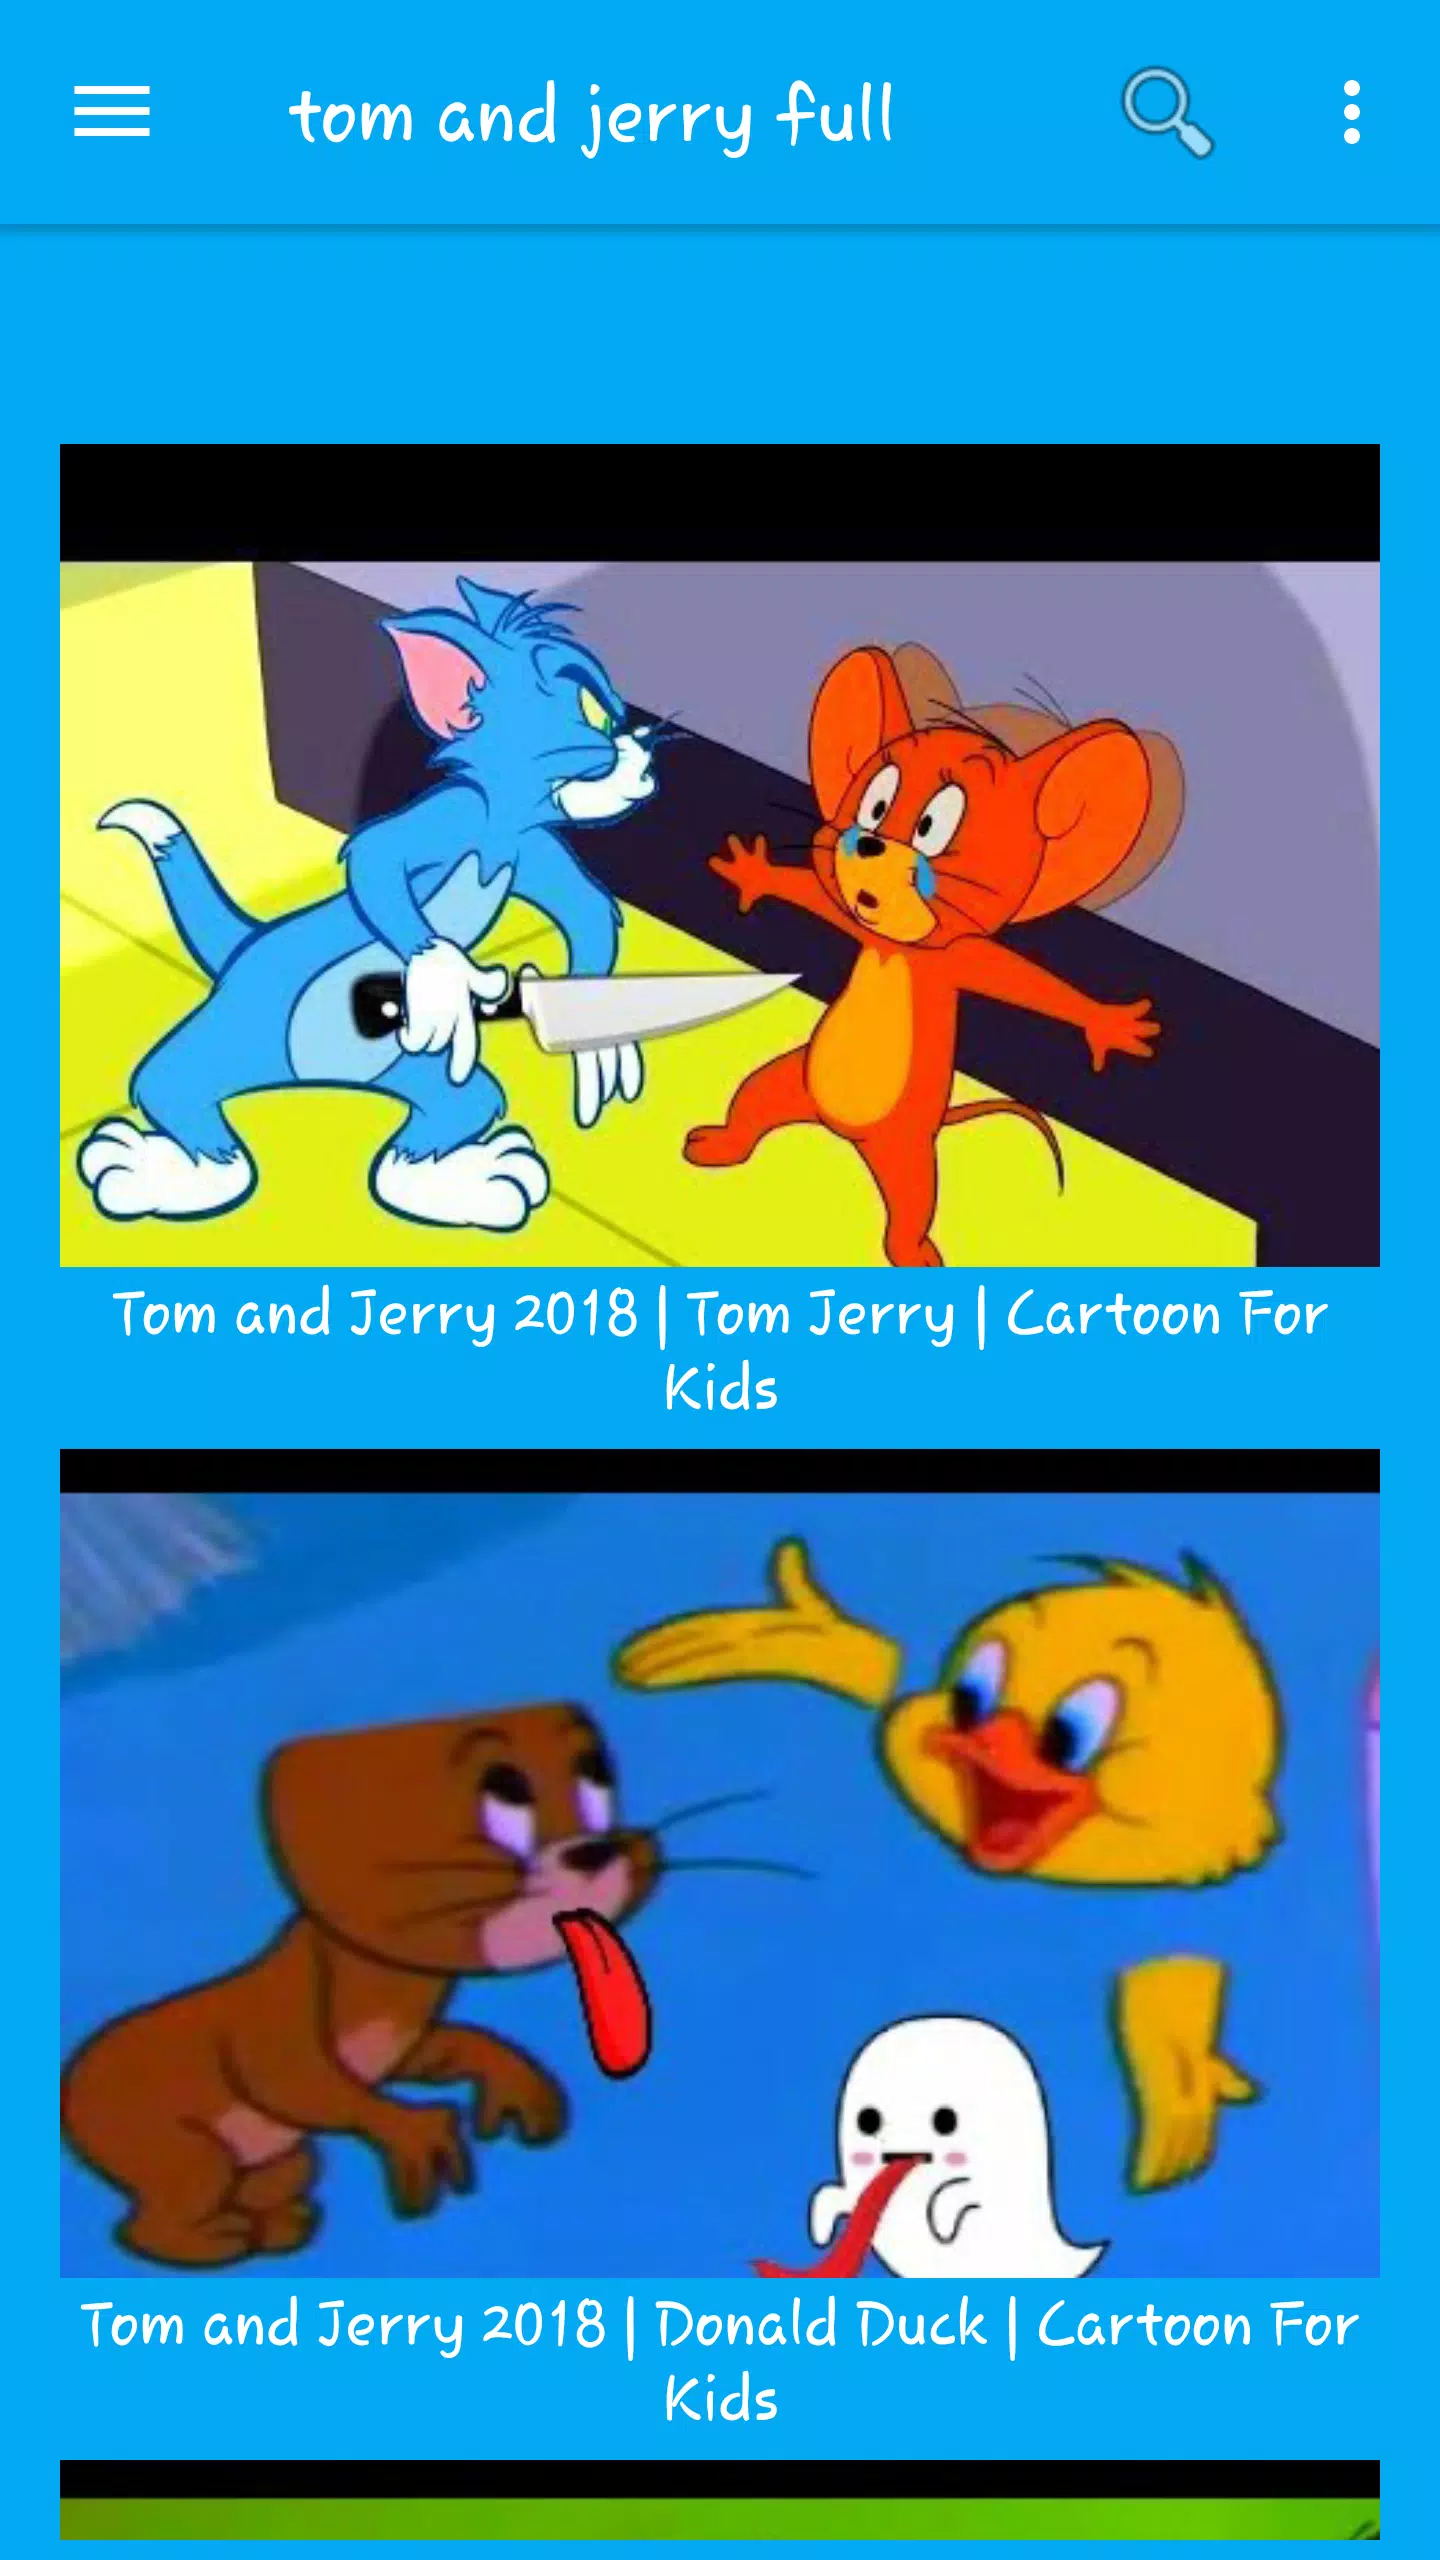 Tải xuống APK the Tom & Jerry Cartoons - full episodes 2019 cho Android